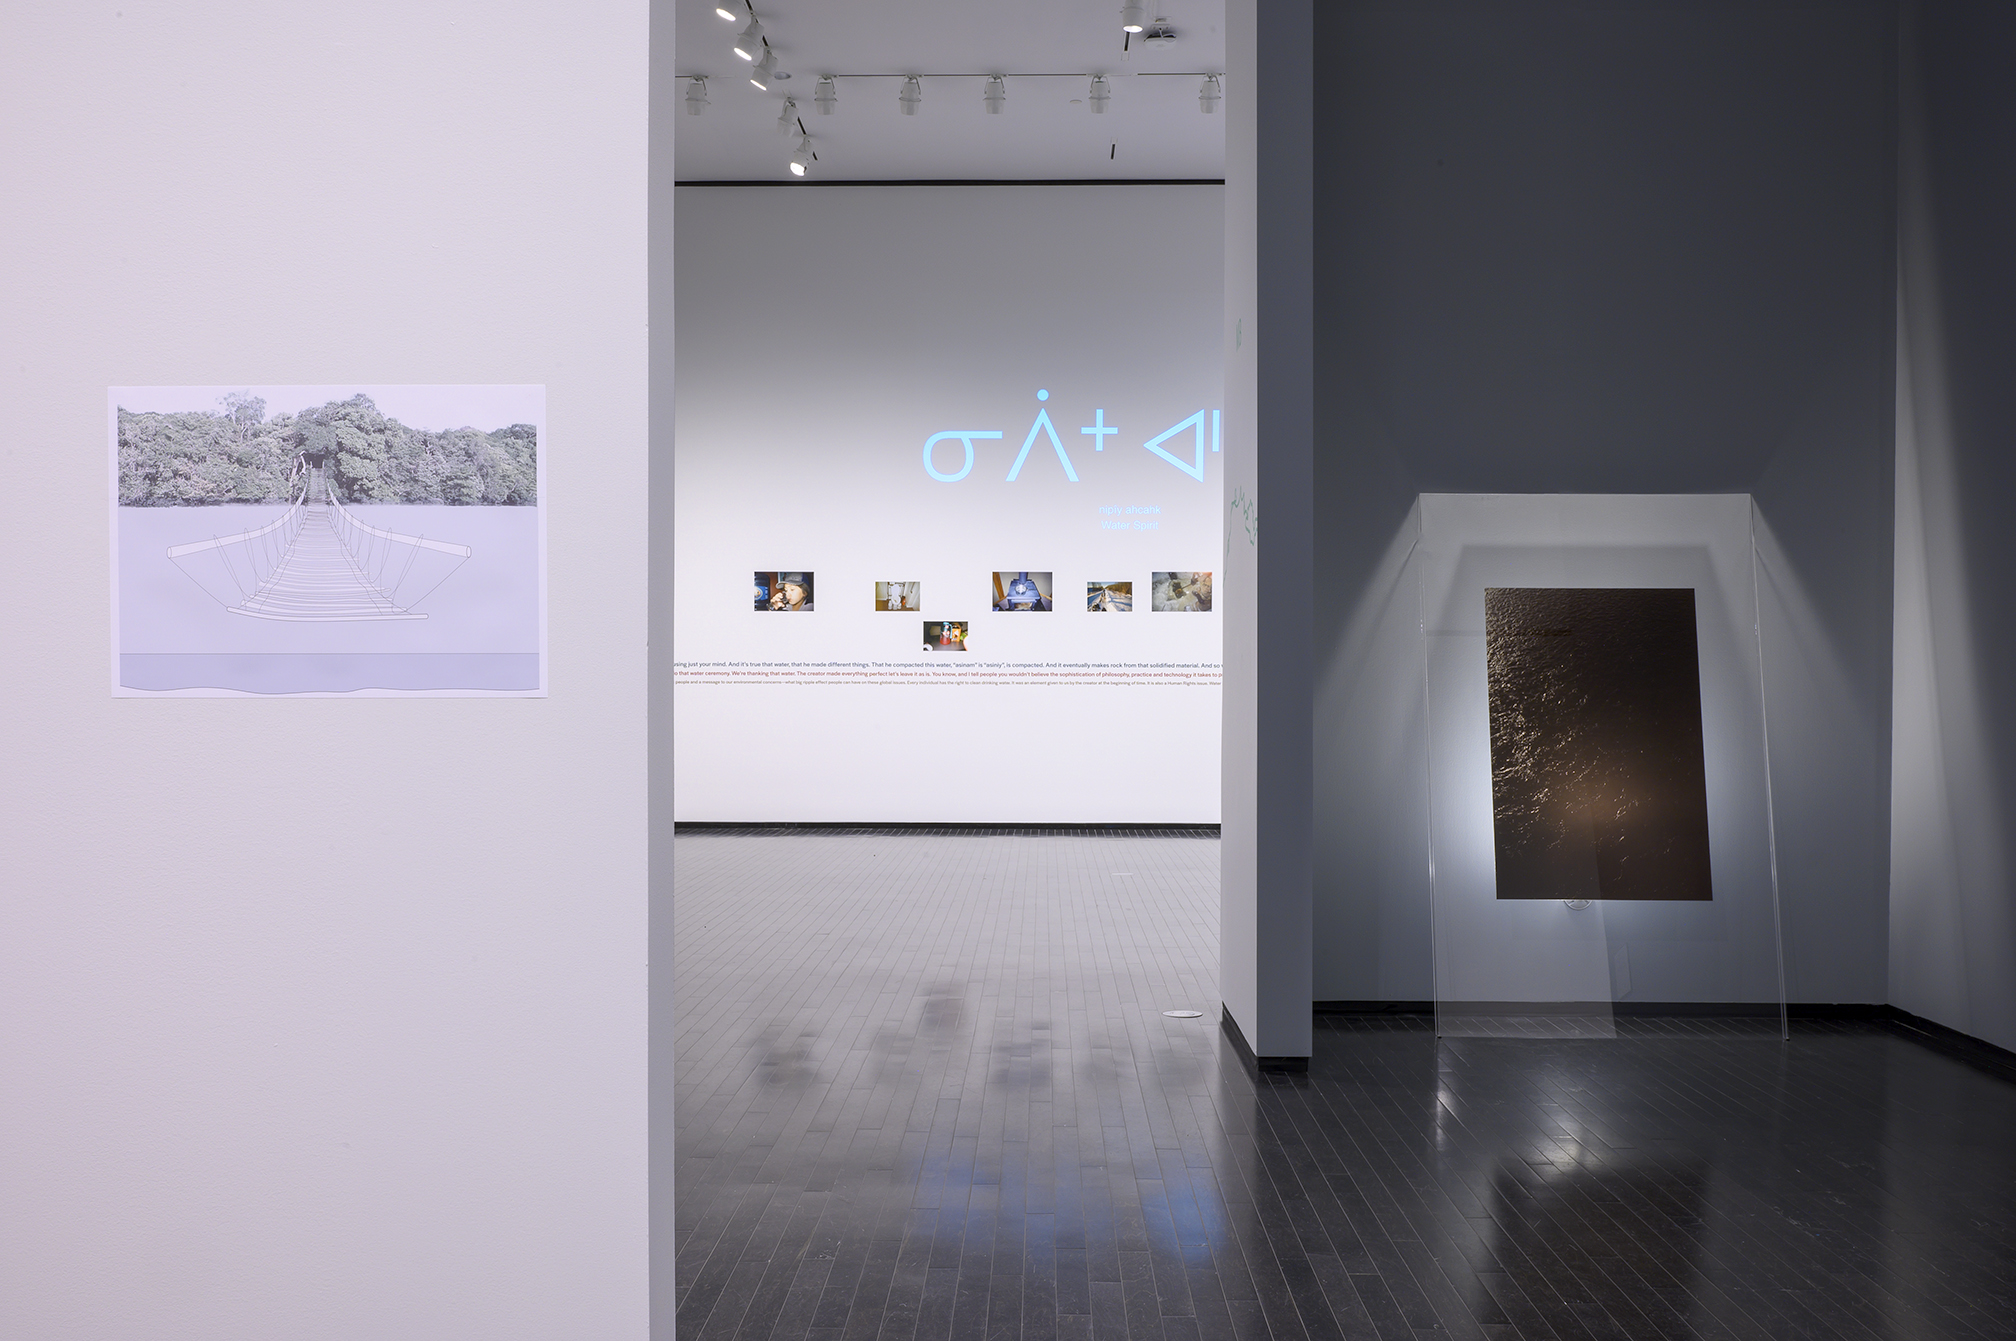 Installation view of the Water - Wise, River Breath: Reframing design’s role with water exhibition at the Art Gallery of Alberta.